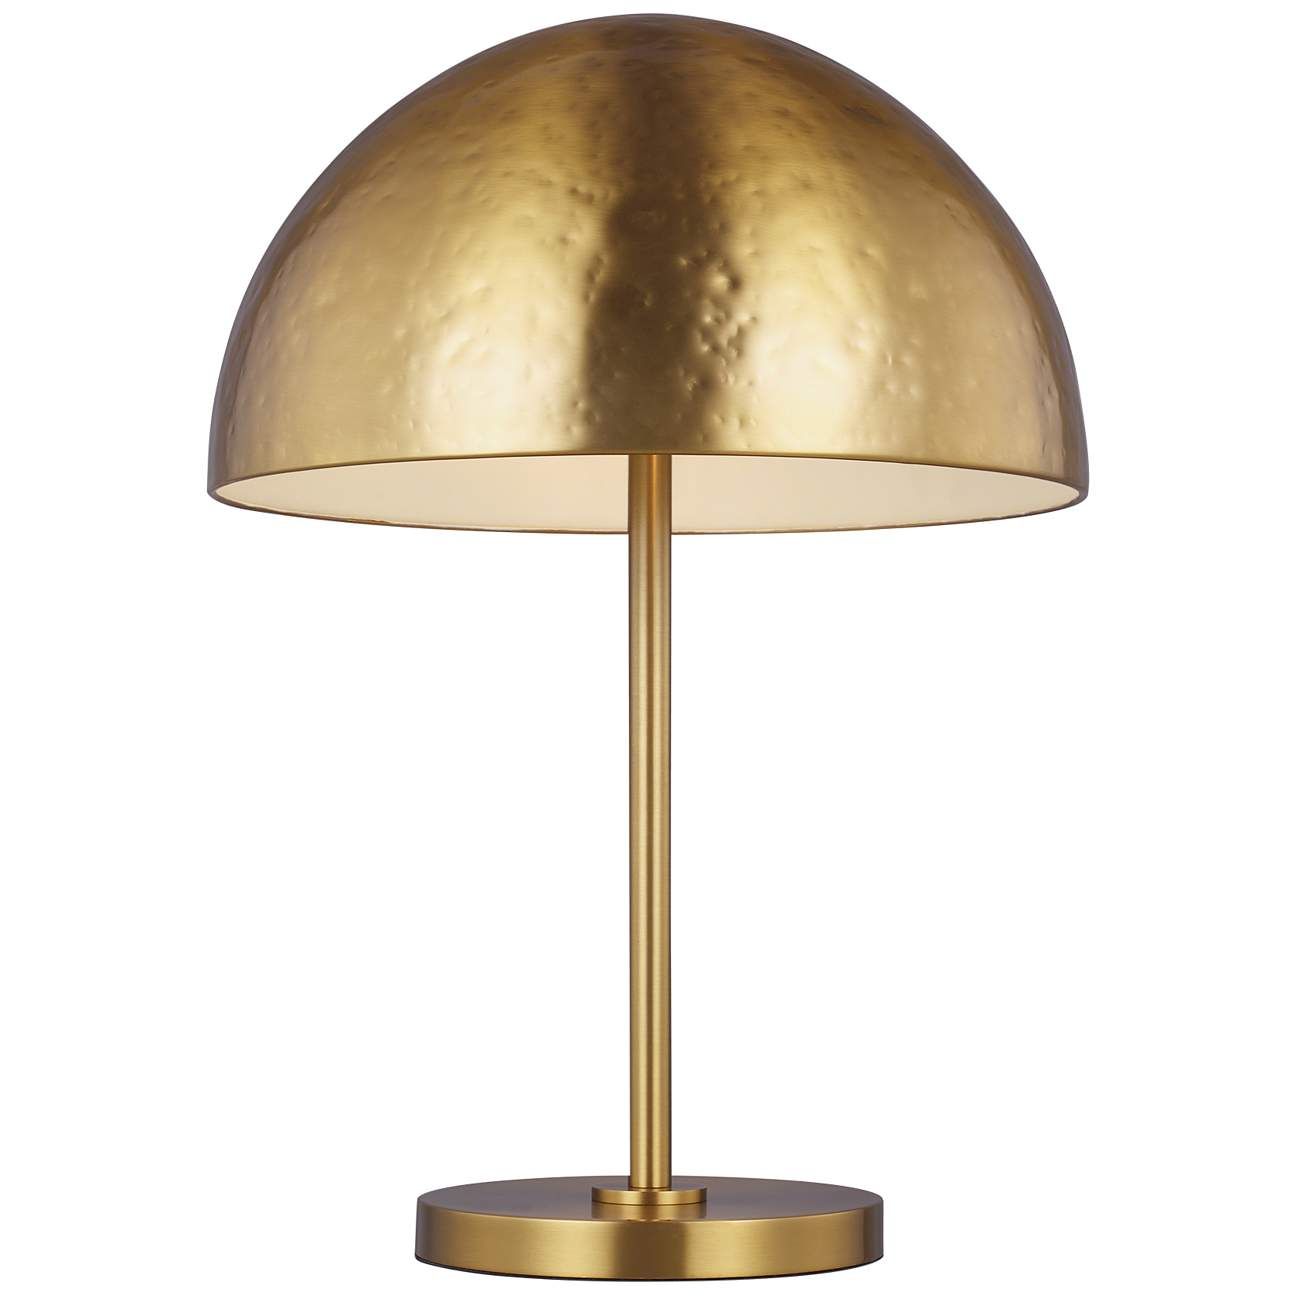 Whare Burnished Brass Mushroom Dome LED Table Lamp | Lamps Plus